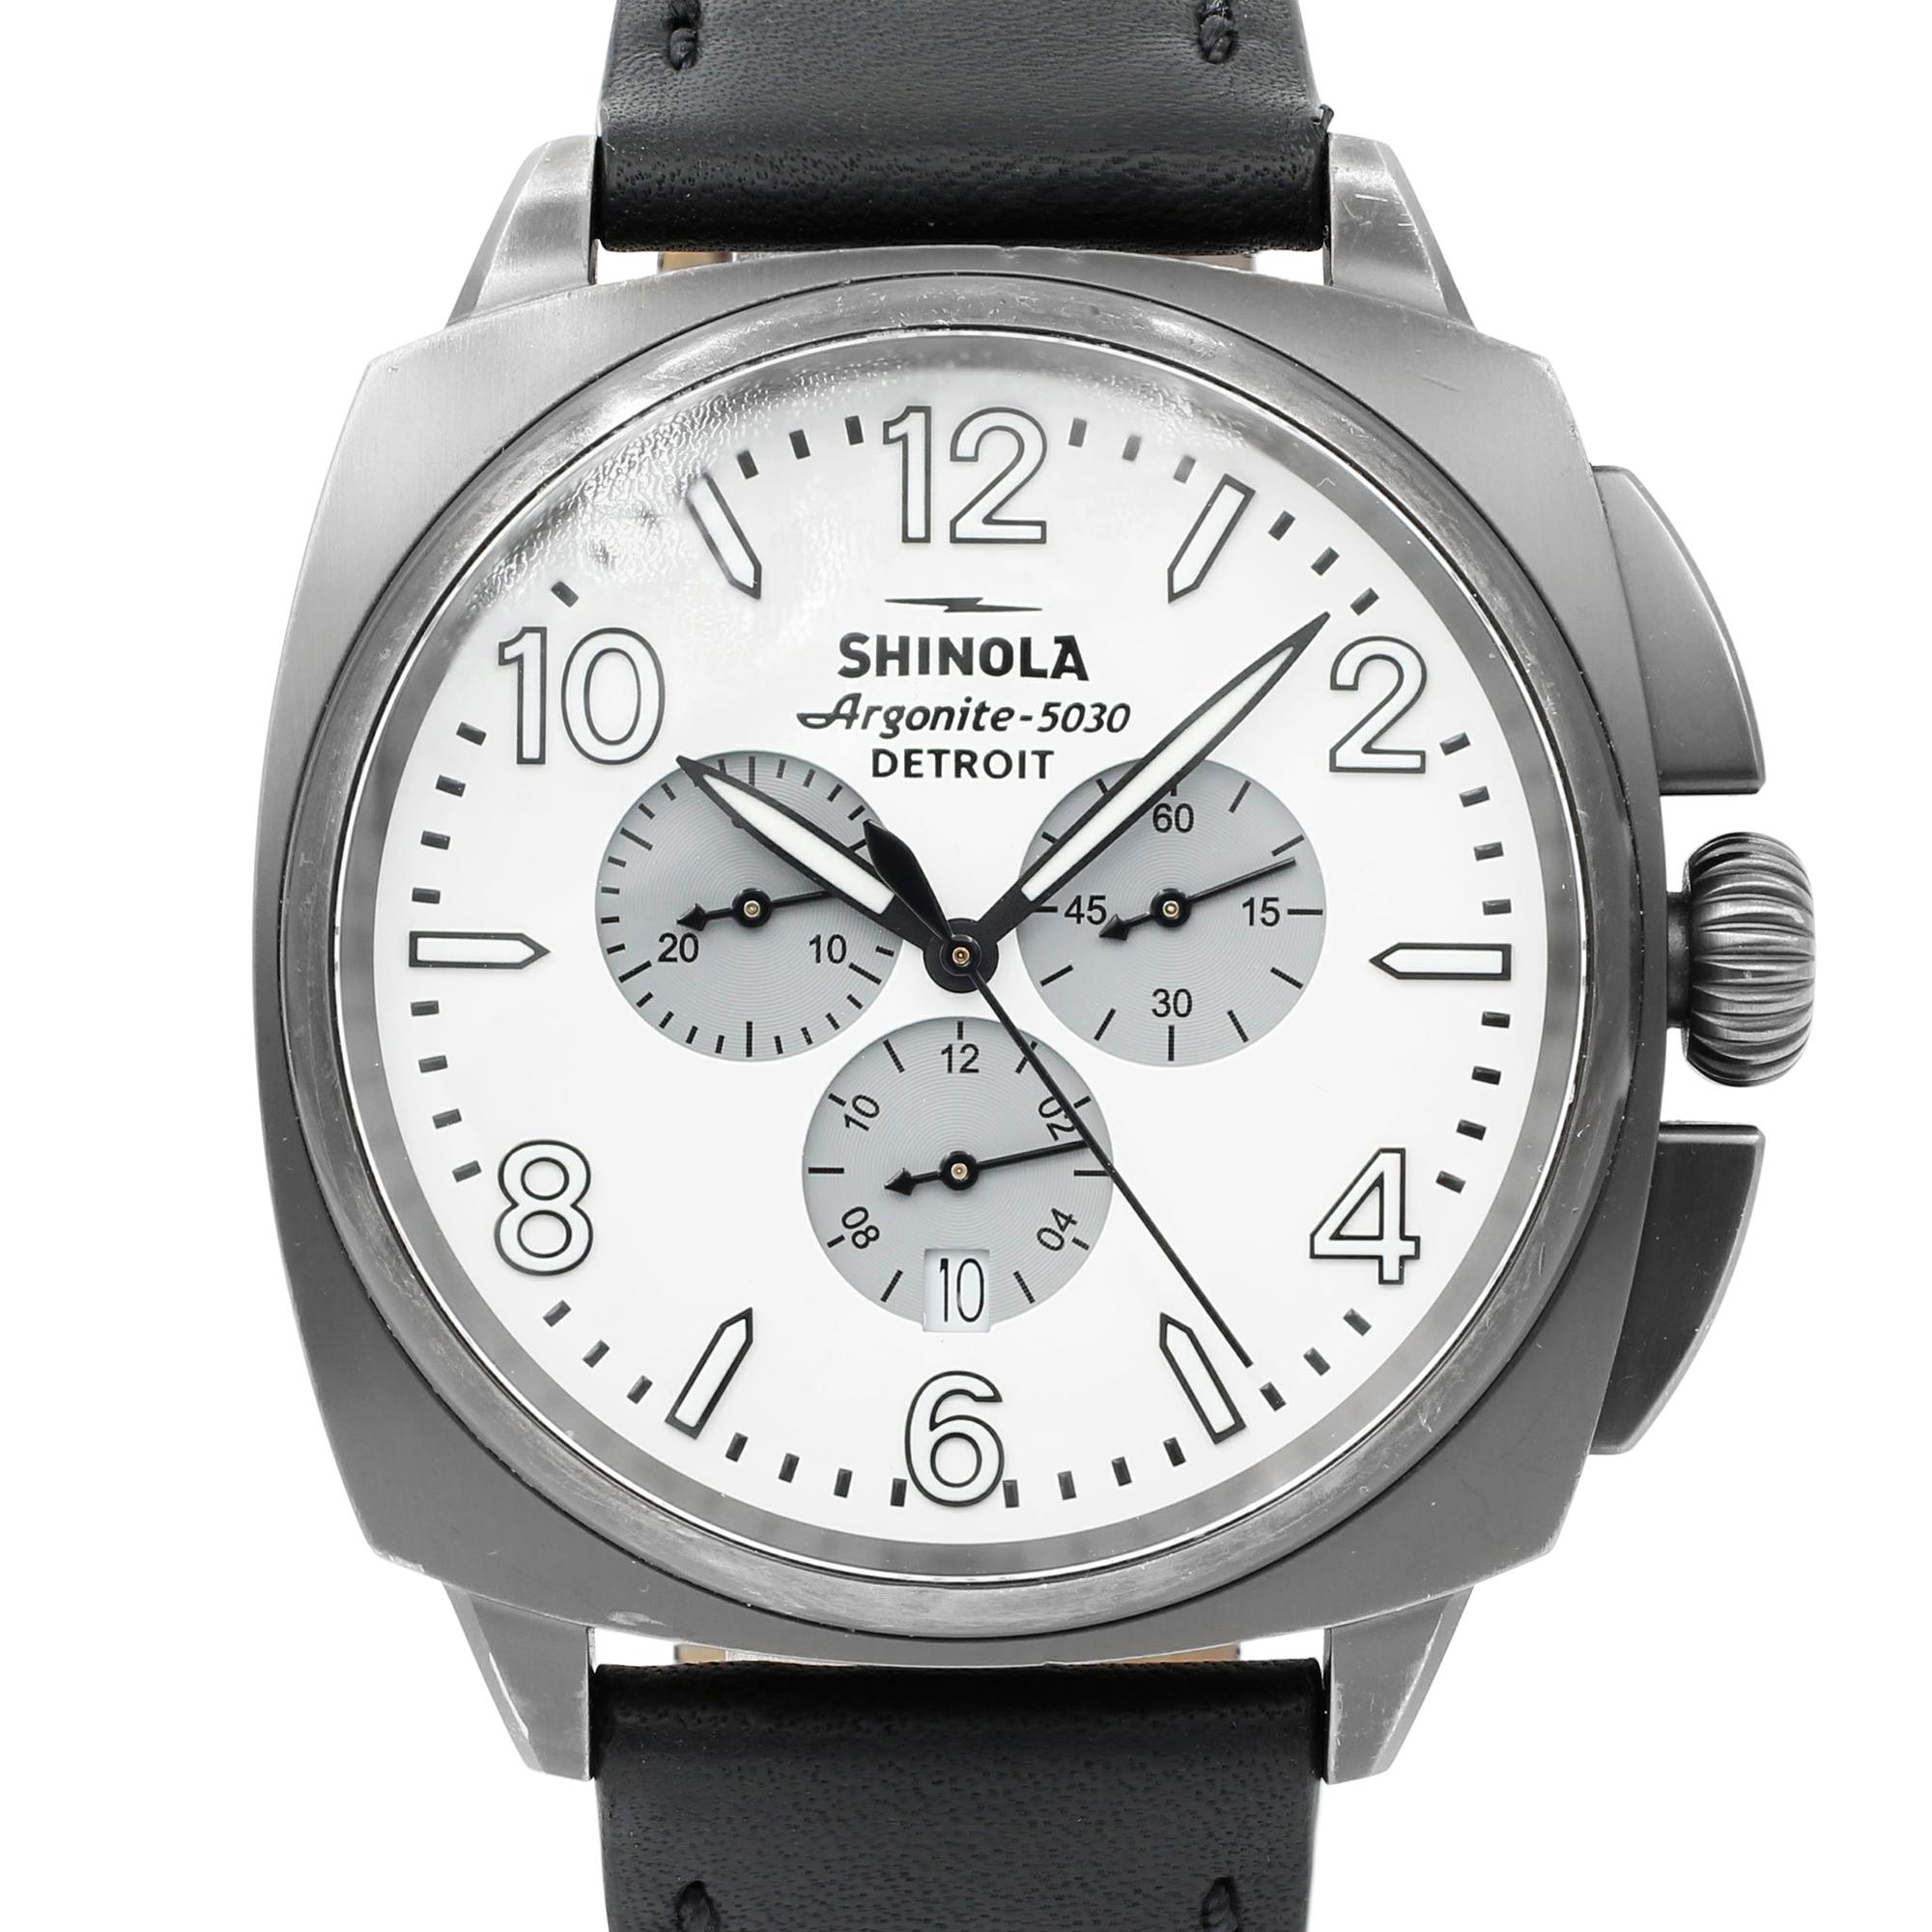 This pre-owned Shinola The Brakeman S10000188 is a beautiful men's timepiece that is powered by a quartz movement which is cased in a stainless steel case. It has a round shape face, chronograph, date, small seconds subdial dial and has hand arabic